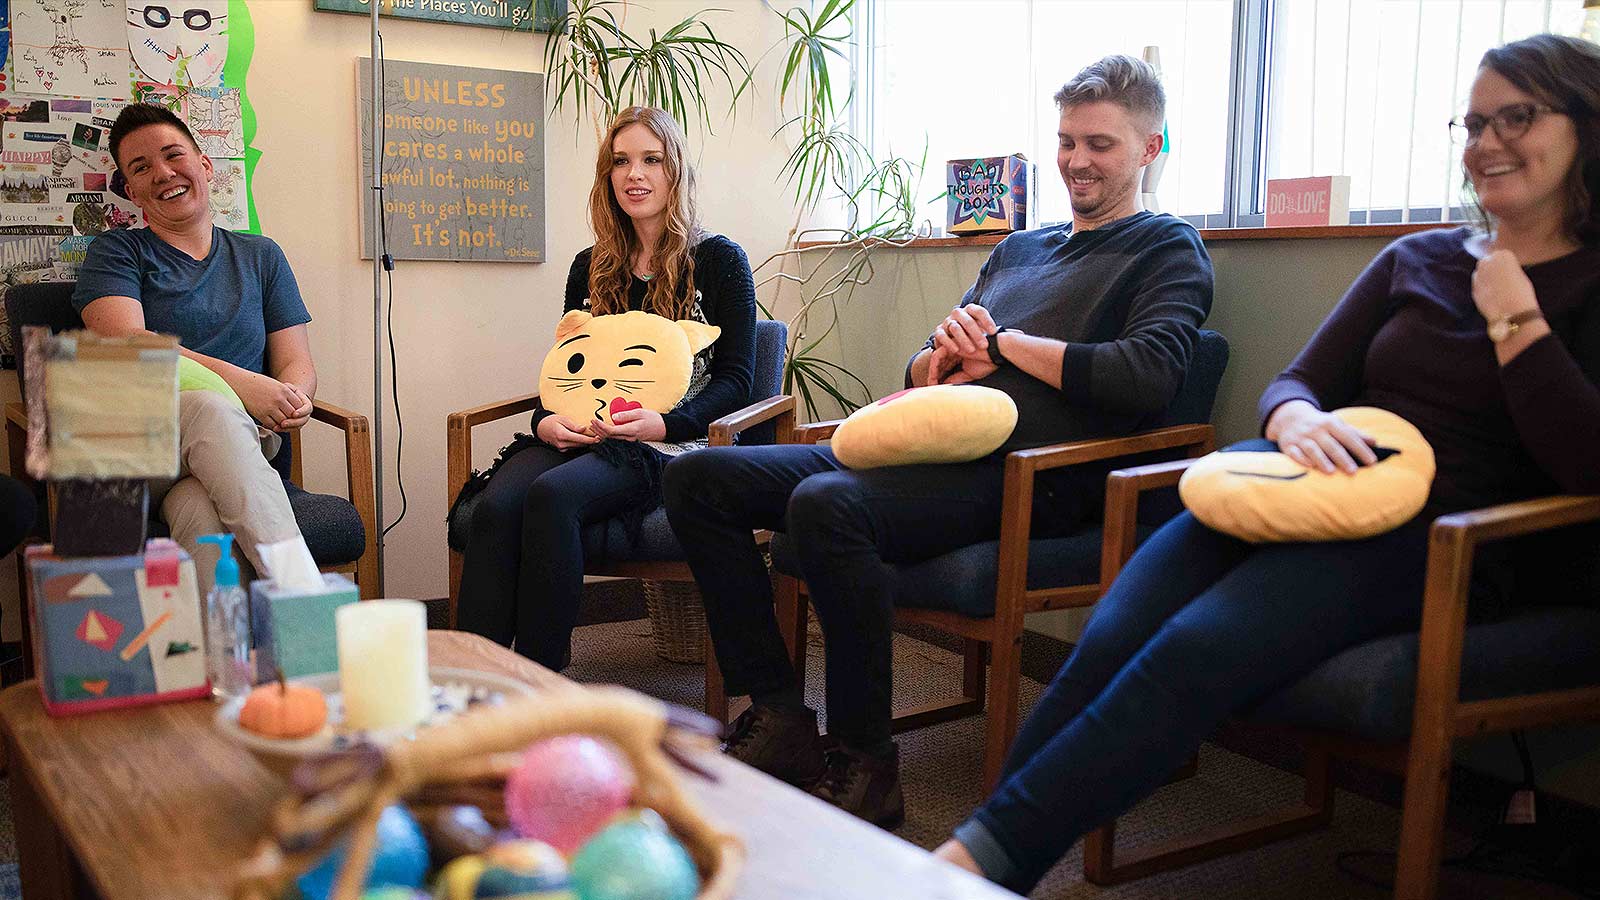 A group therapy session where participants are holding emoticon pillows and sharing a light-hearted moment.